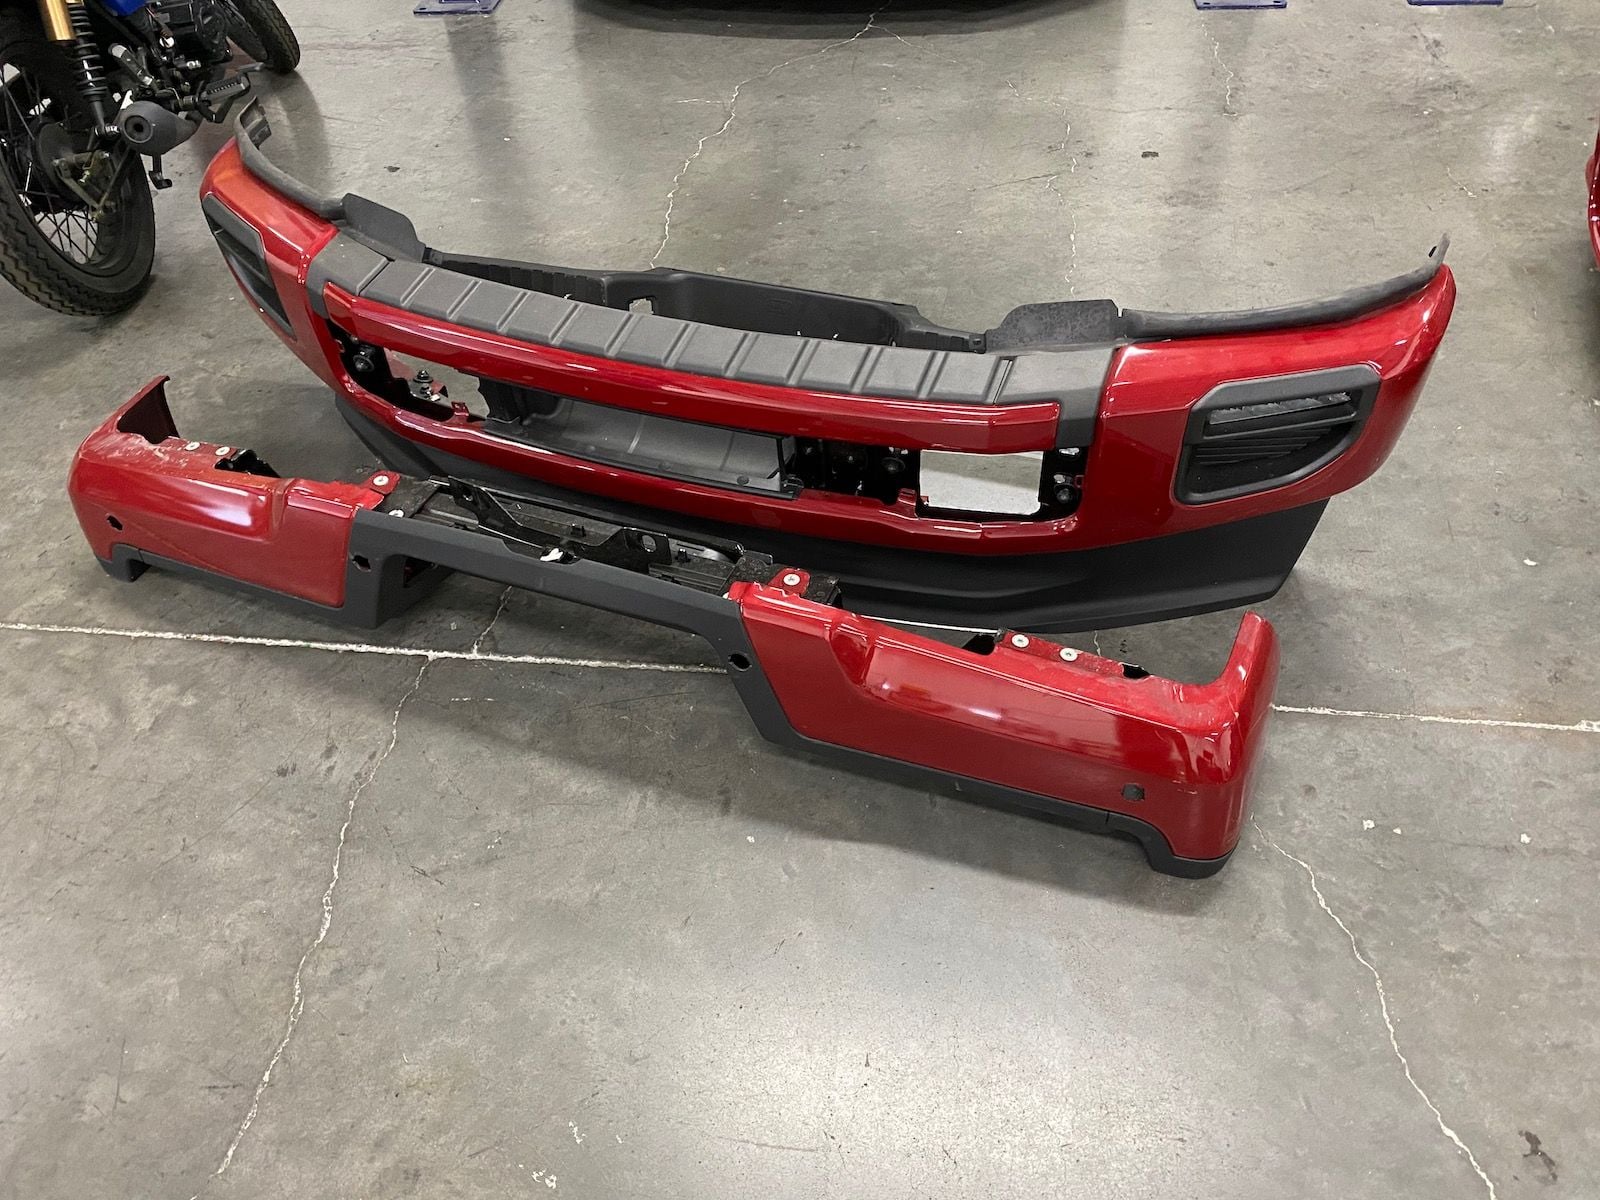 2020 Ford F-250 Super Duty - Front Bumper - Factory Painted Rapid Red - Exterior Body Parts - $250 - Las Vegas, NV 89118, United States